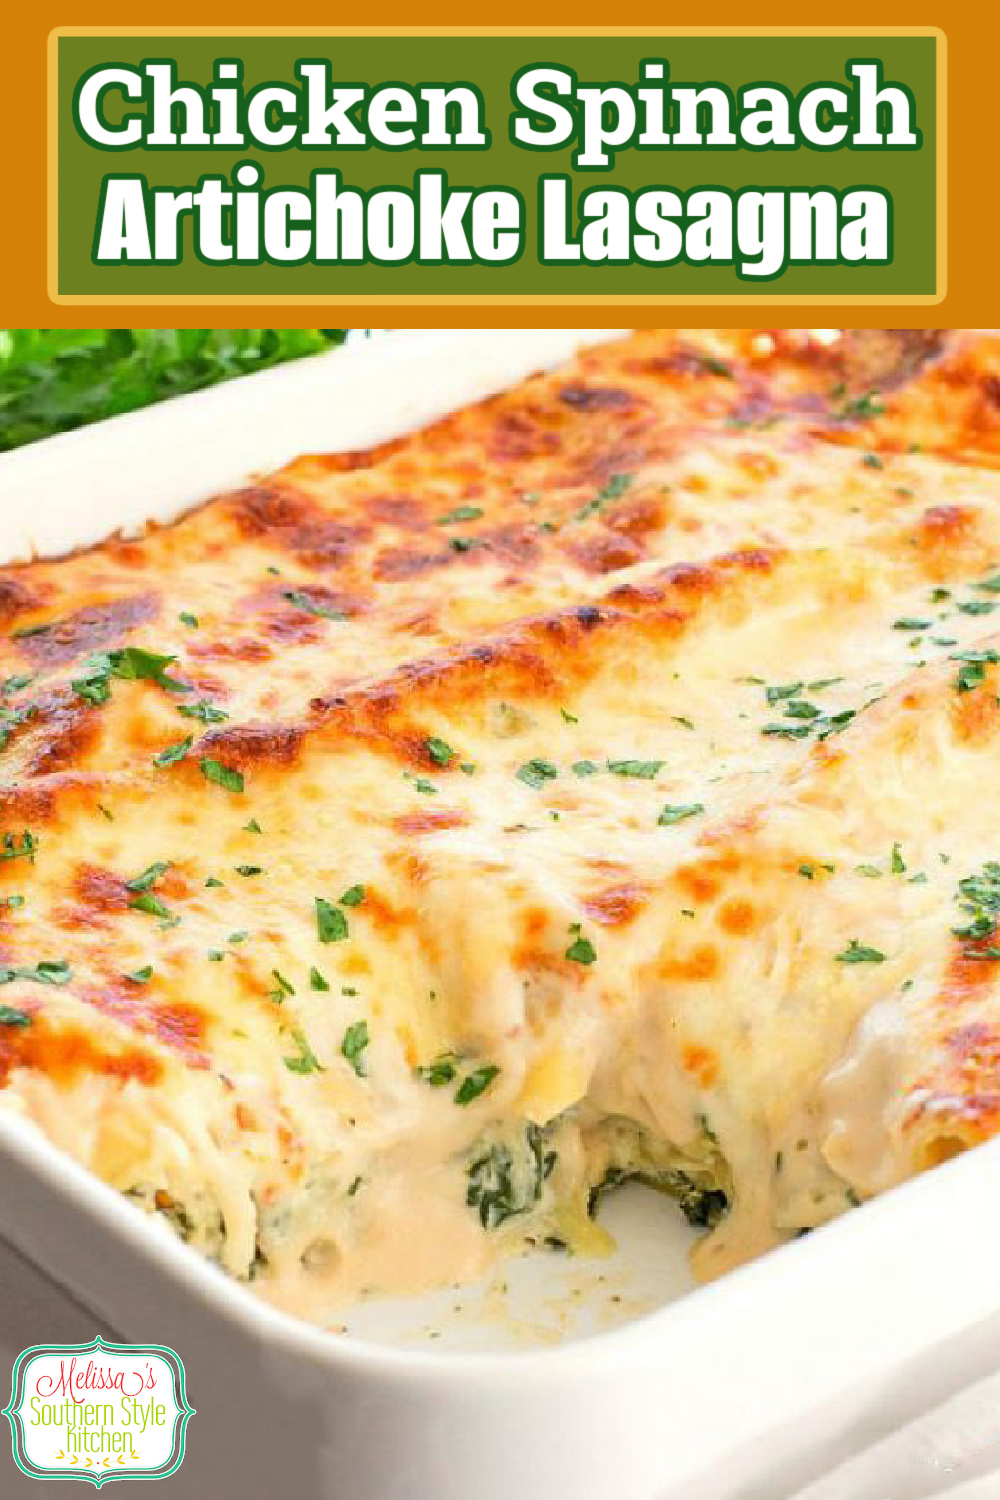 The same flavors you love in spinach artichoke dip shine in this Cheesy Chicken Spinach Artichoke Lasagna #chickenlasagna #easychickenrecipes #chickenbreastrecipes #chicken #cheesy #lasagna #pastarecipes #spinachdip #artichokes #southernrecipes #dinnerideas